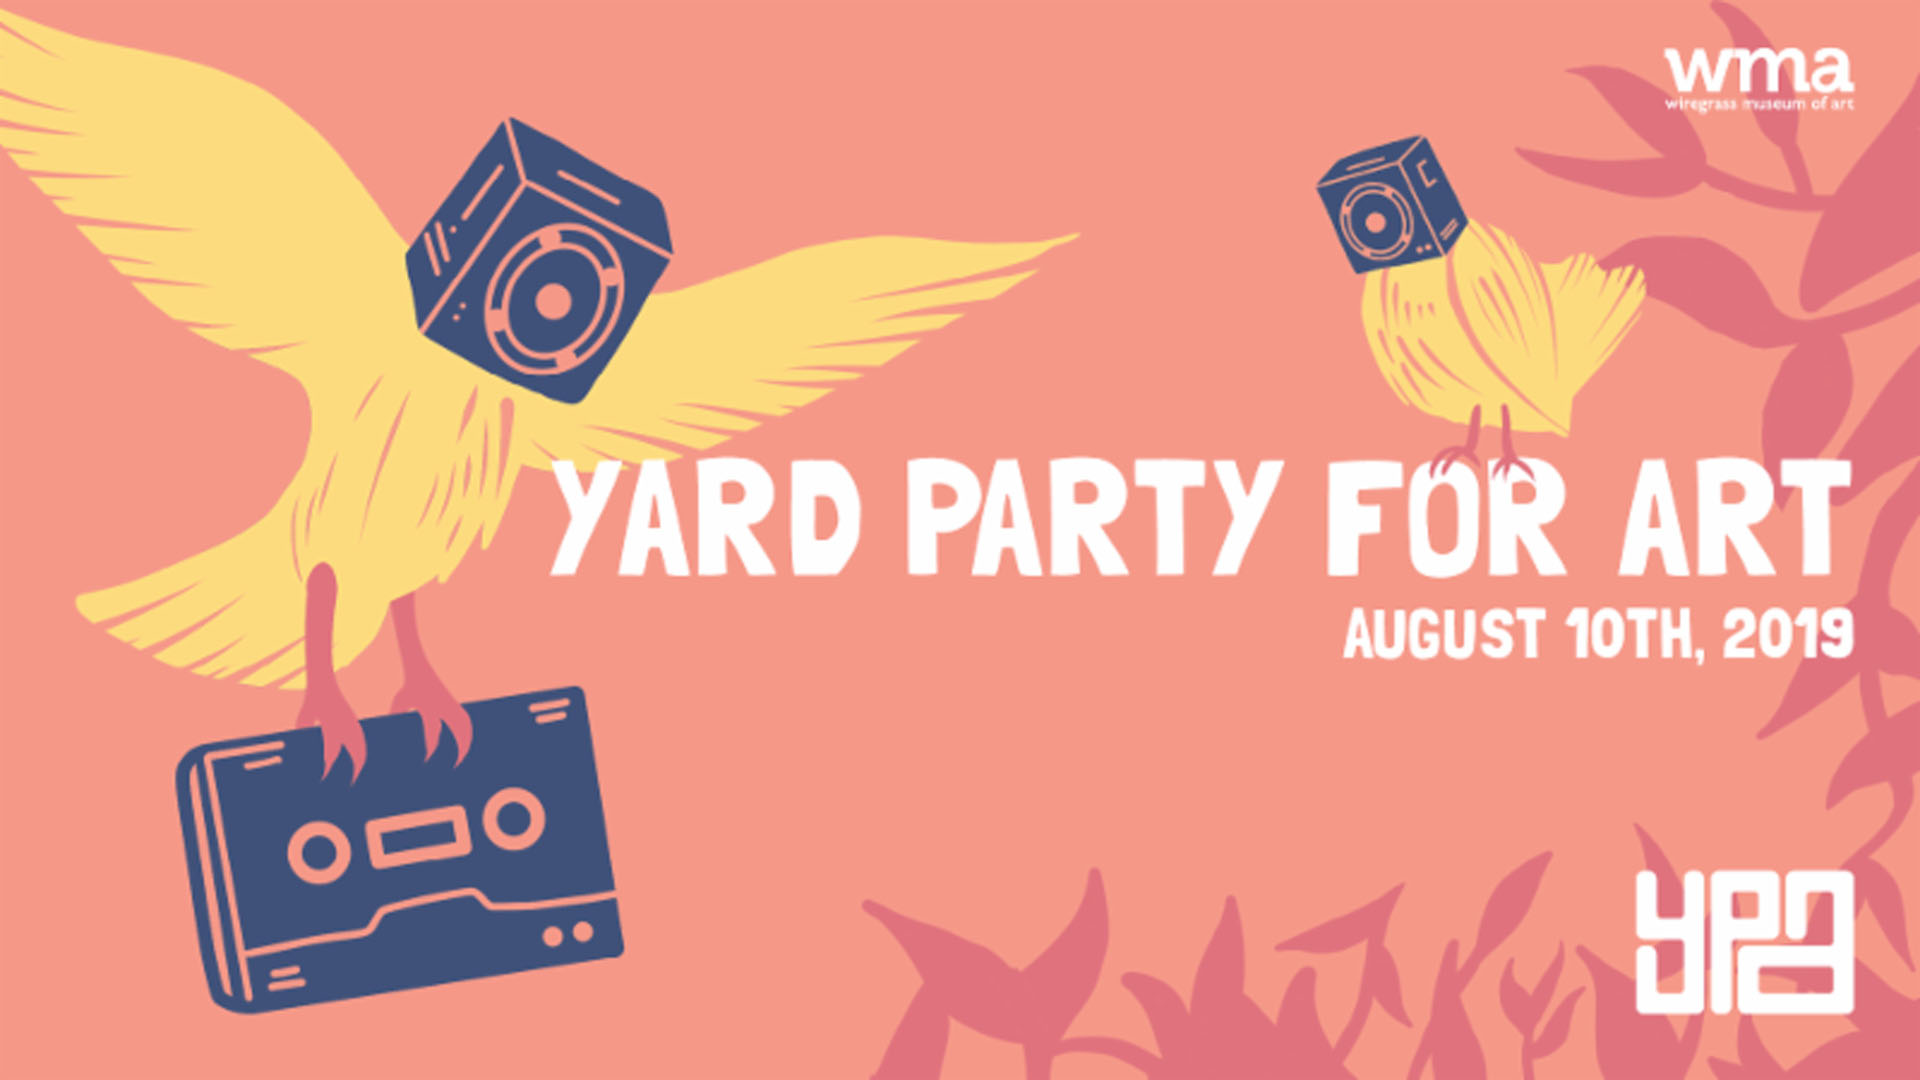 Yard Party for Art returns to WMA on August 10